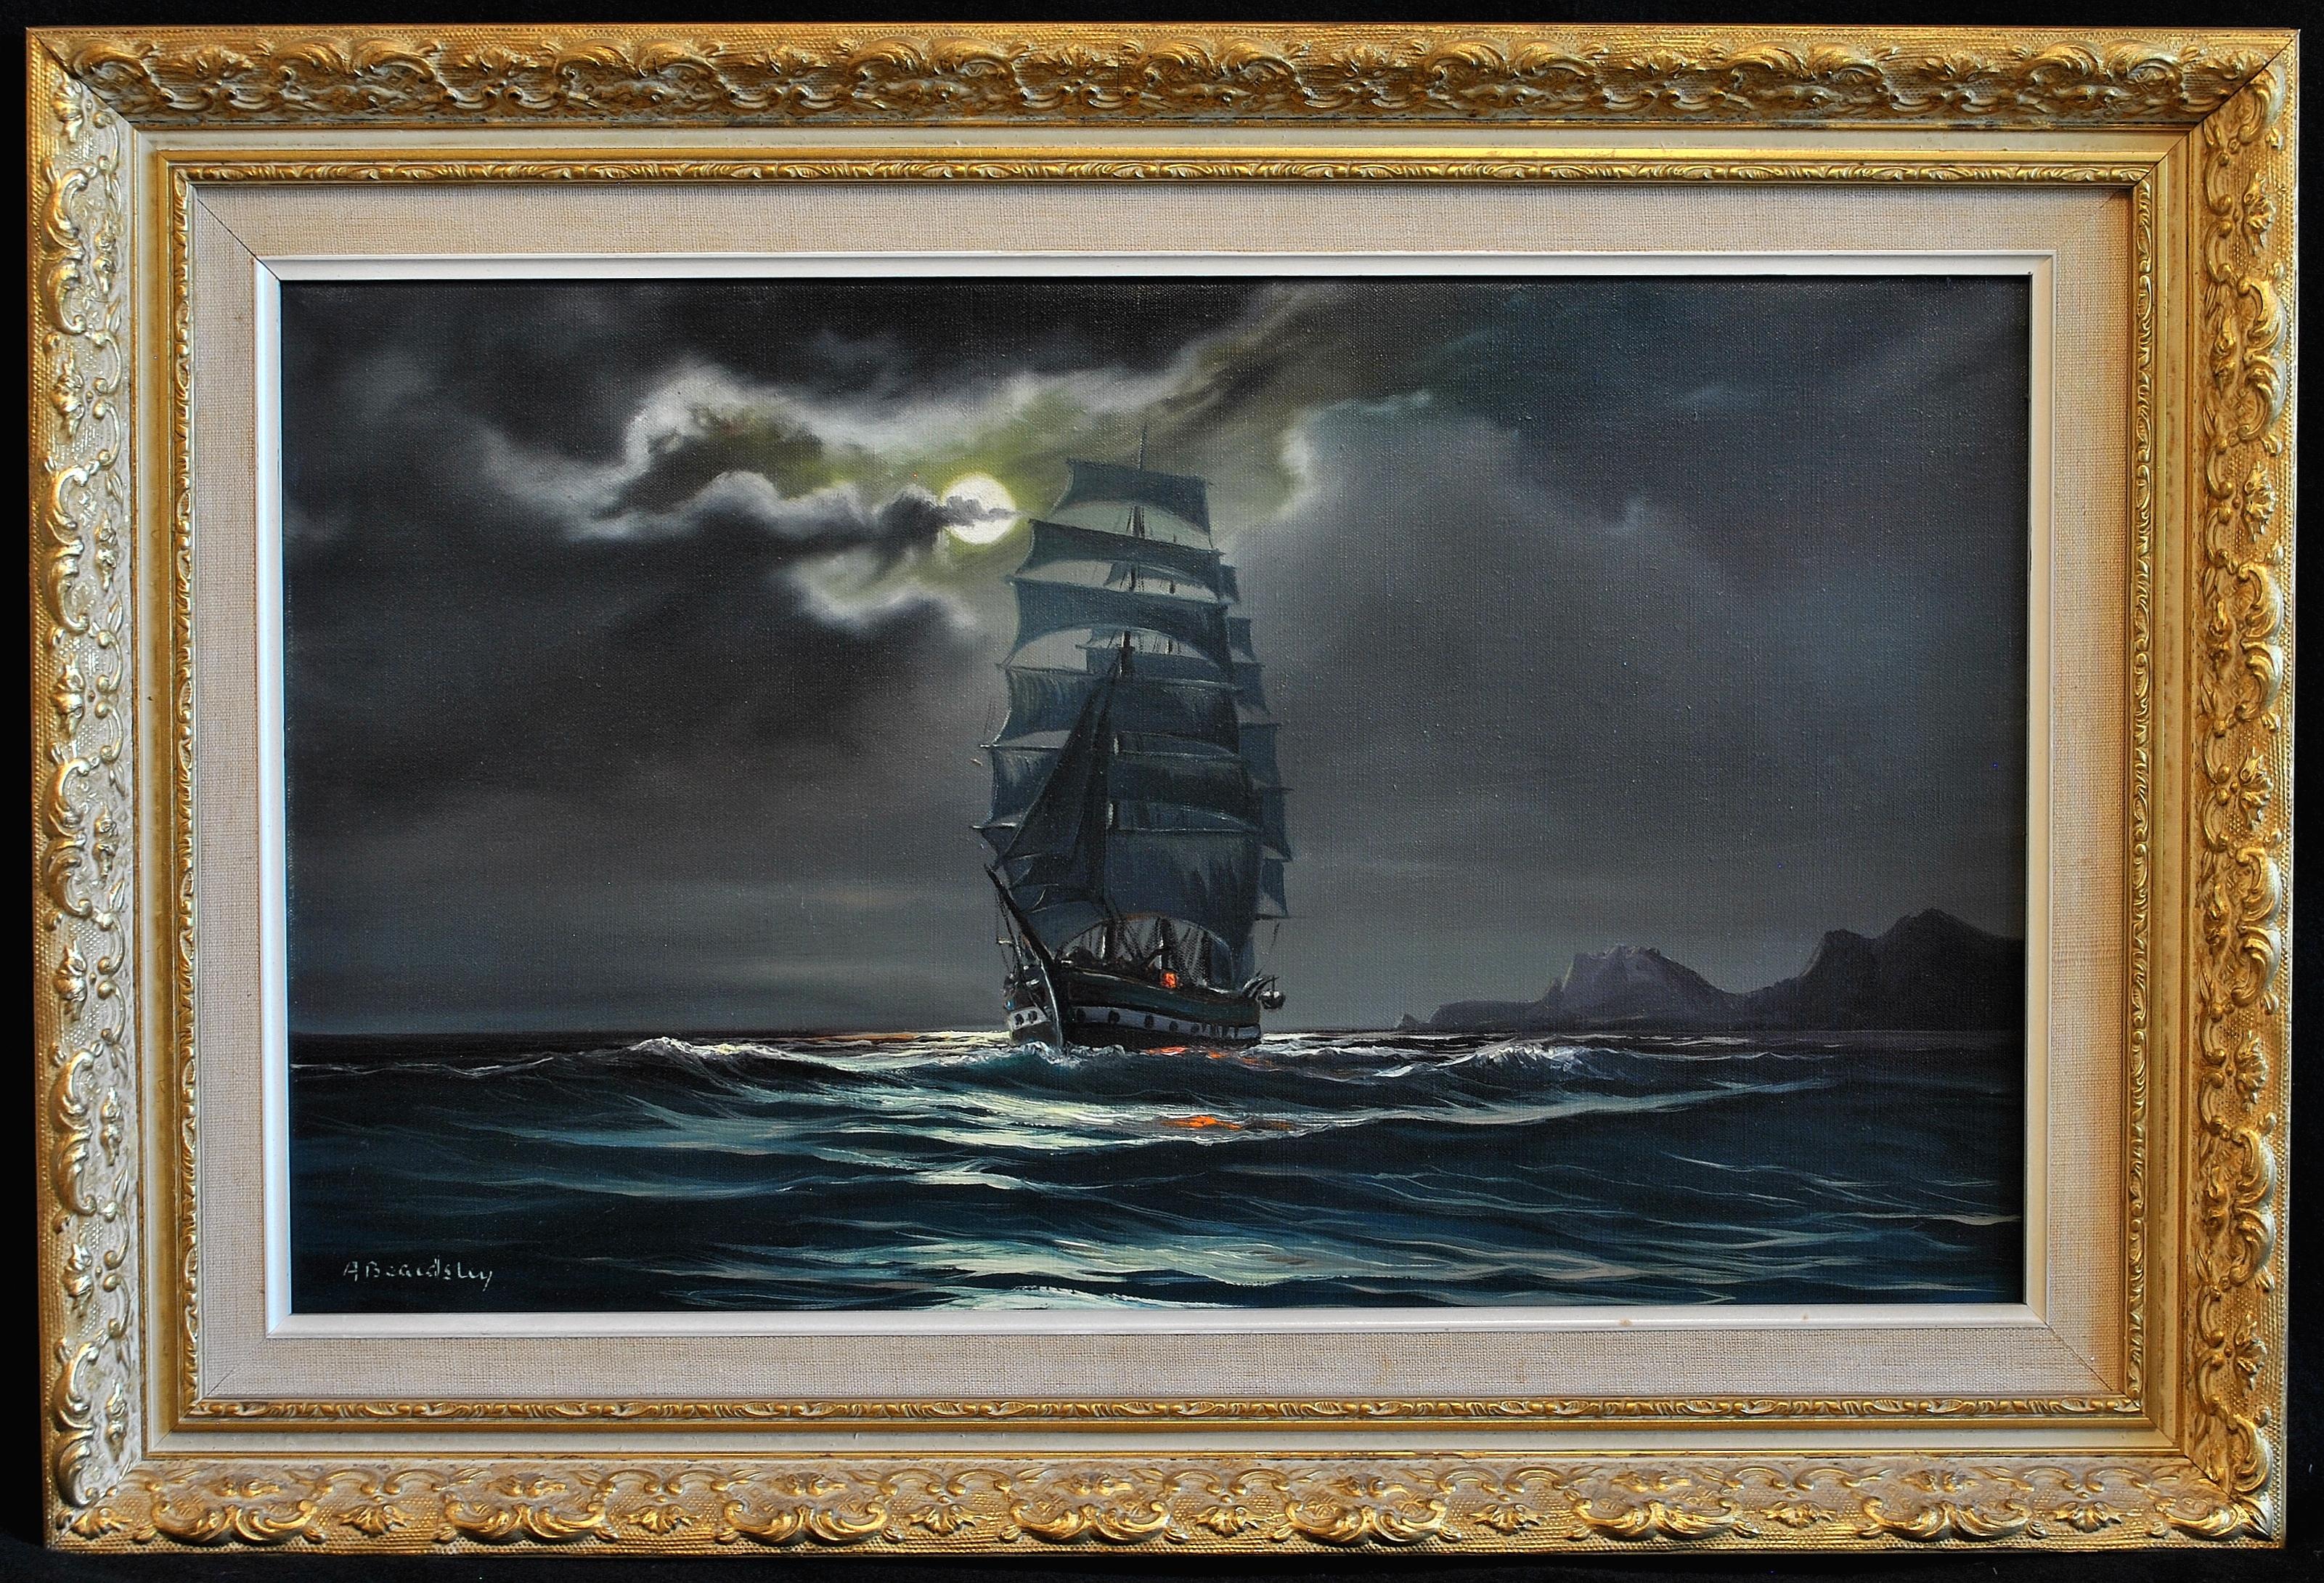 Arnold Beardsley Landscape Painting - The Hesperus - Mid 20th Century Moonlit Seascape Oil on Canvas Ship Painting